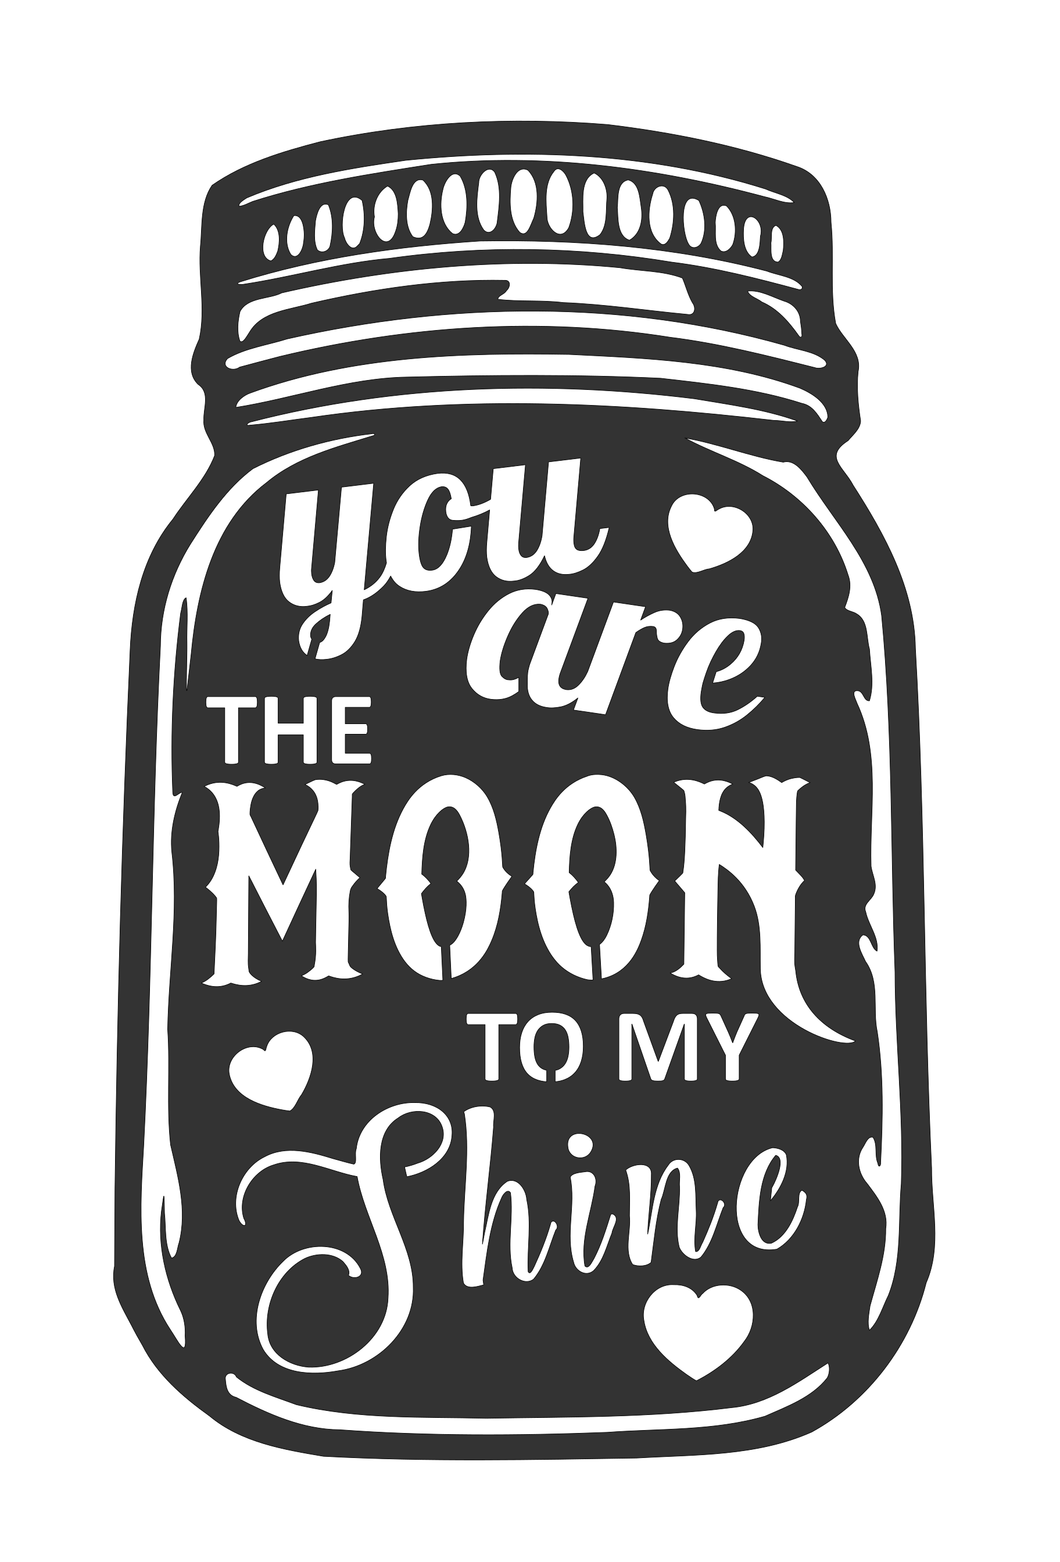 You are the Moon to my Shine metal art